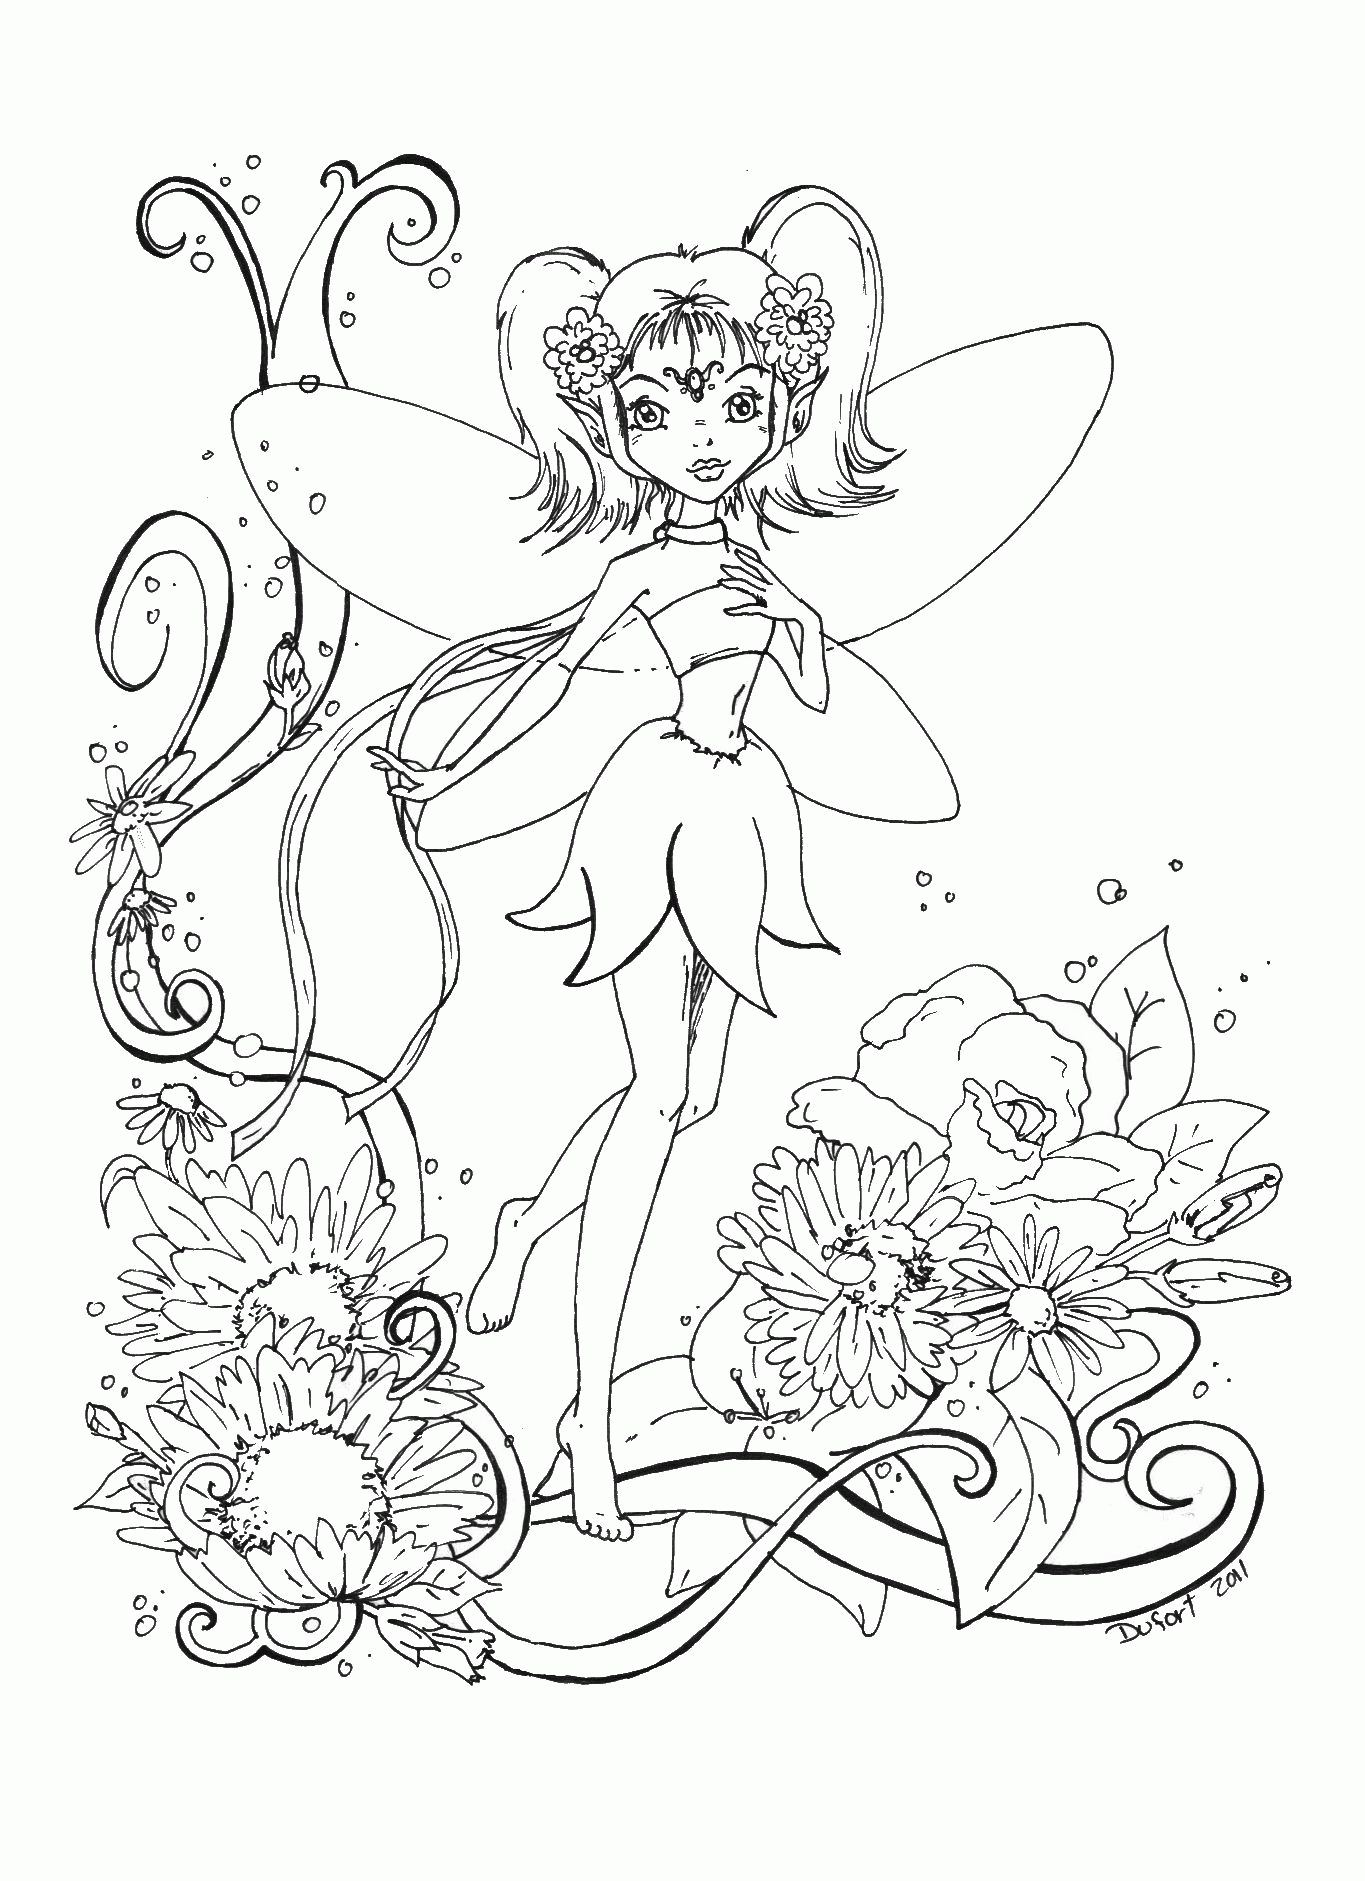 Fairy With 2 Wings Coloring Pages For Adult Coloring ...